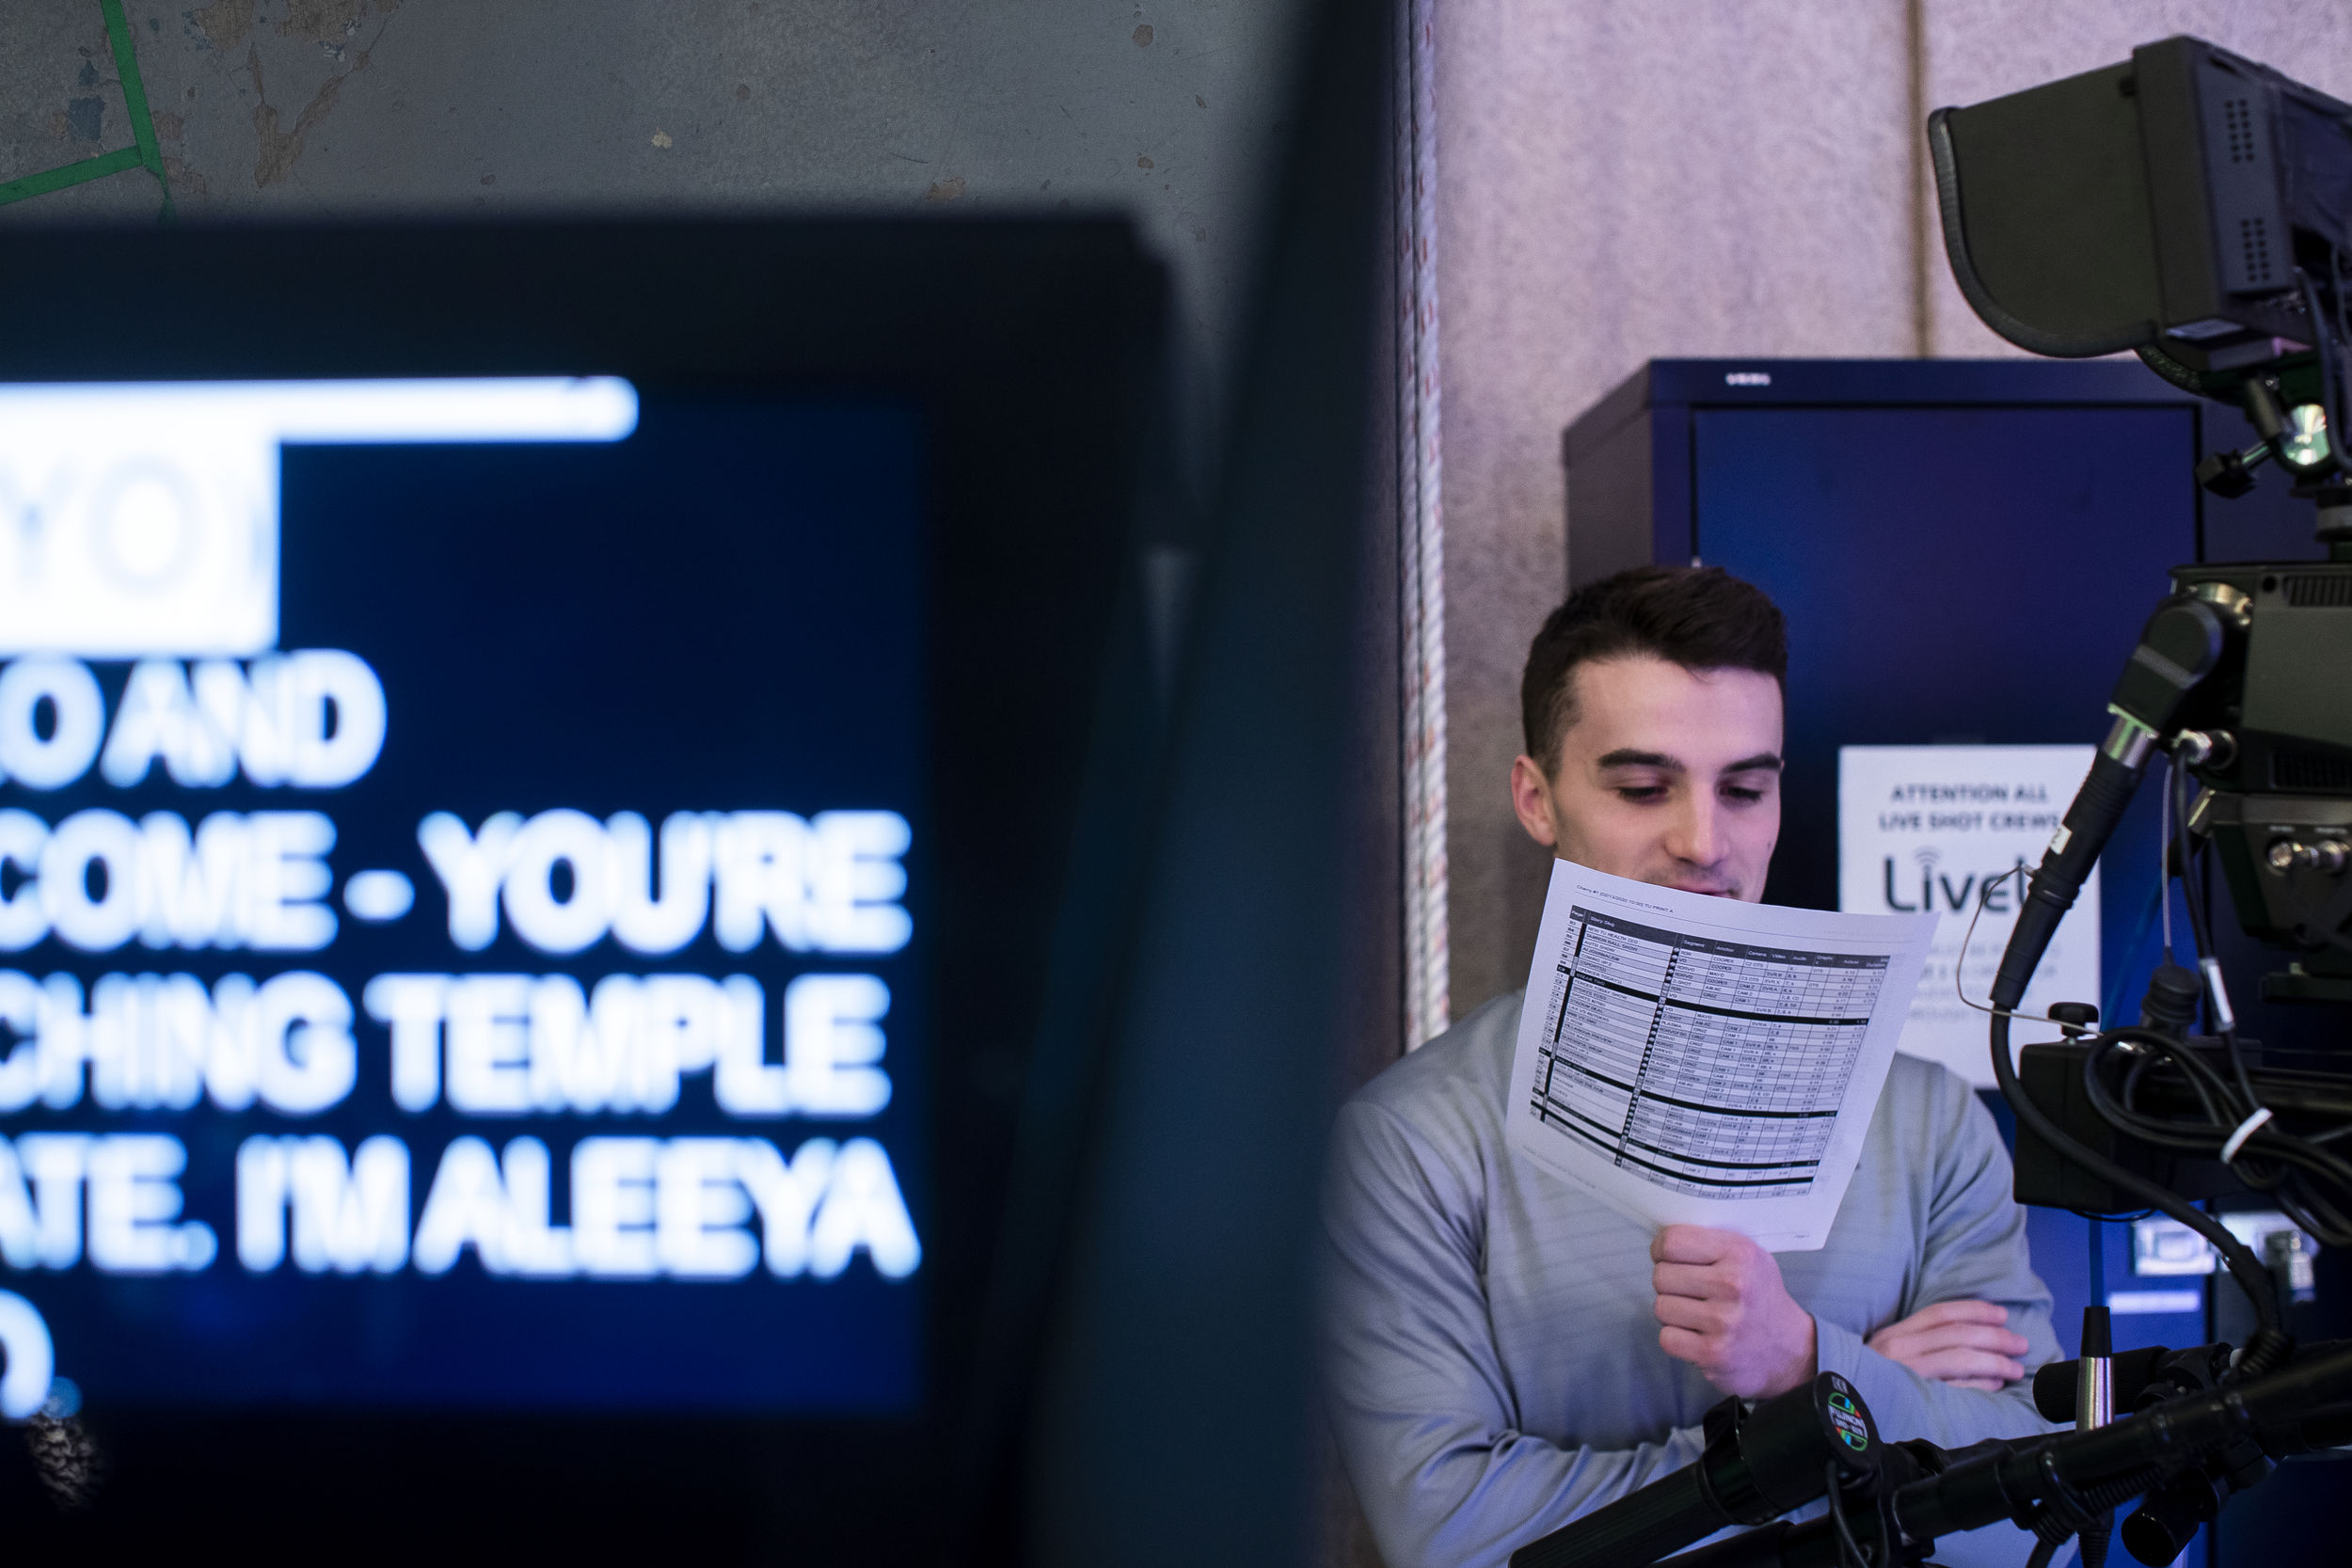 A student stands against the wall of a broadcasting studio reading a script while a monitor in front displays text.